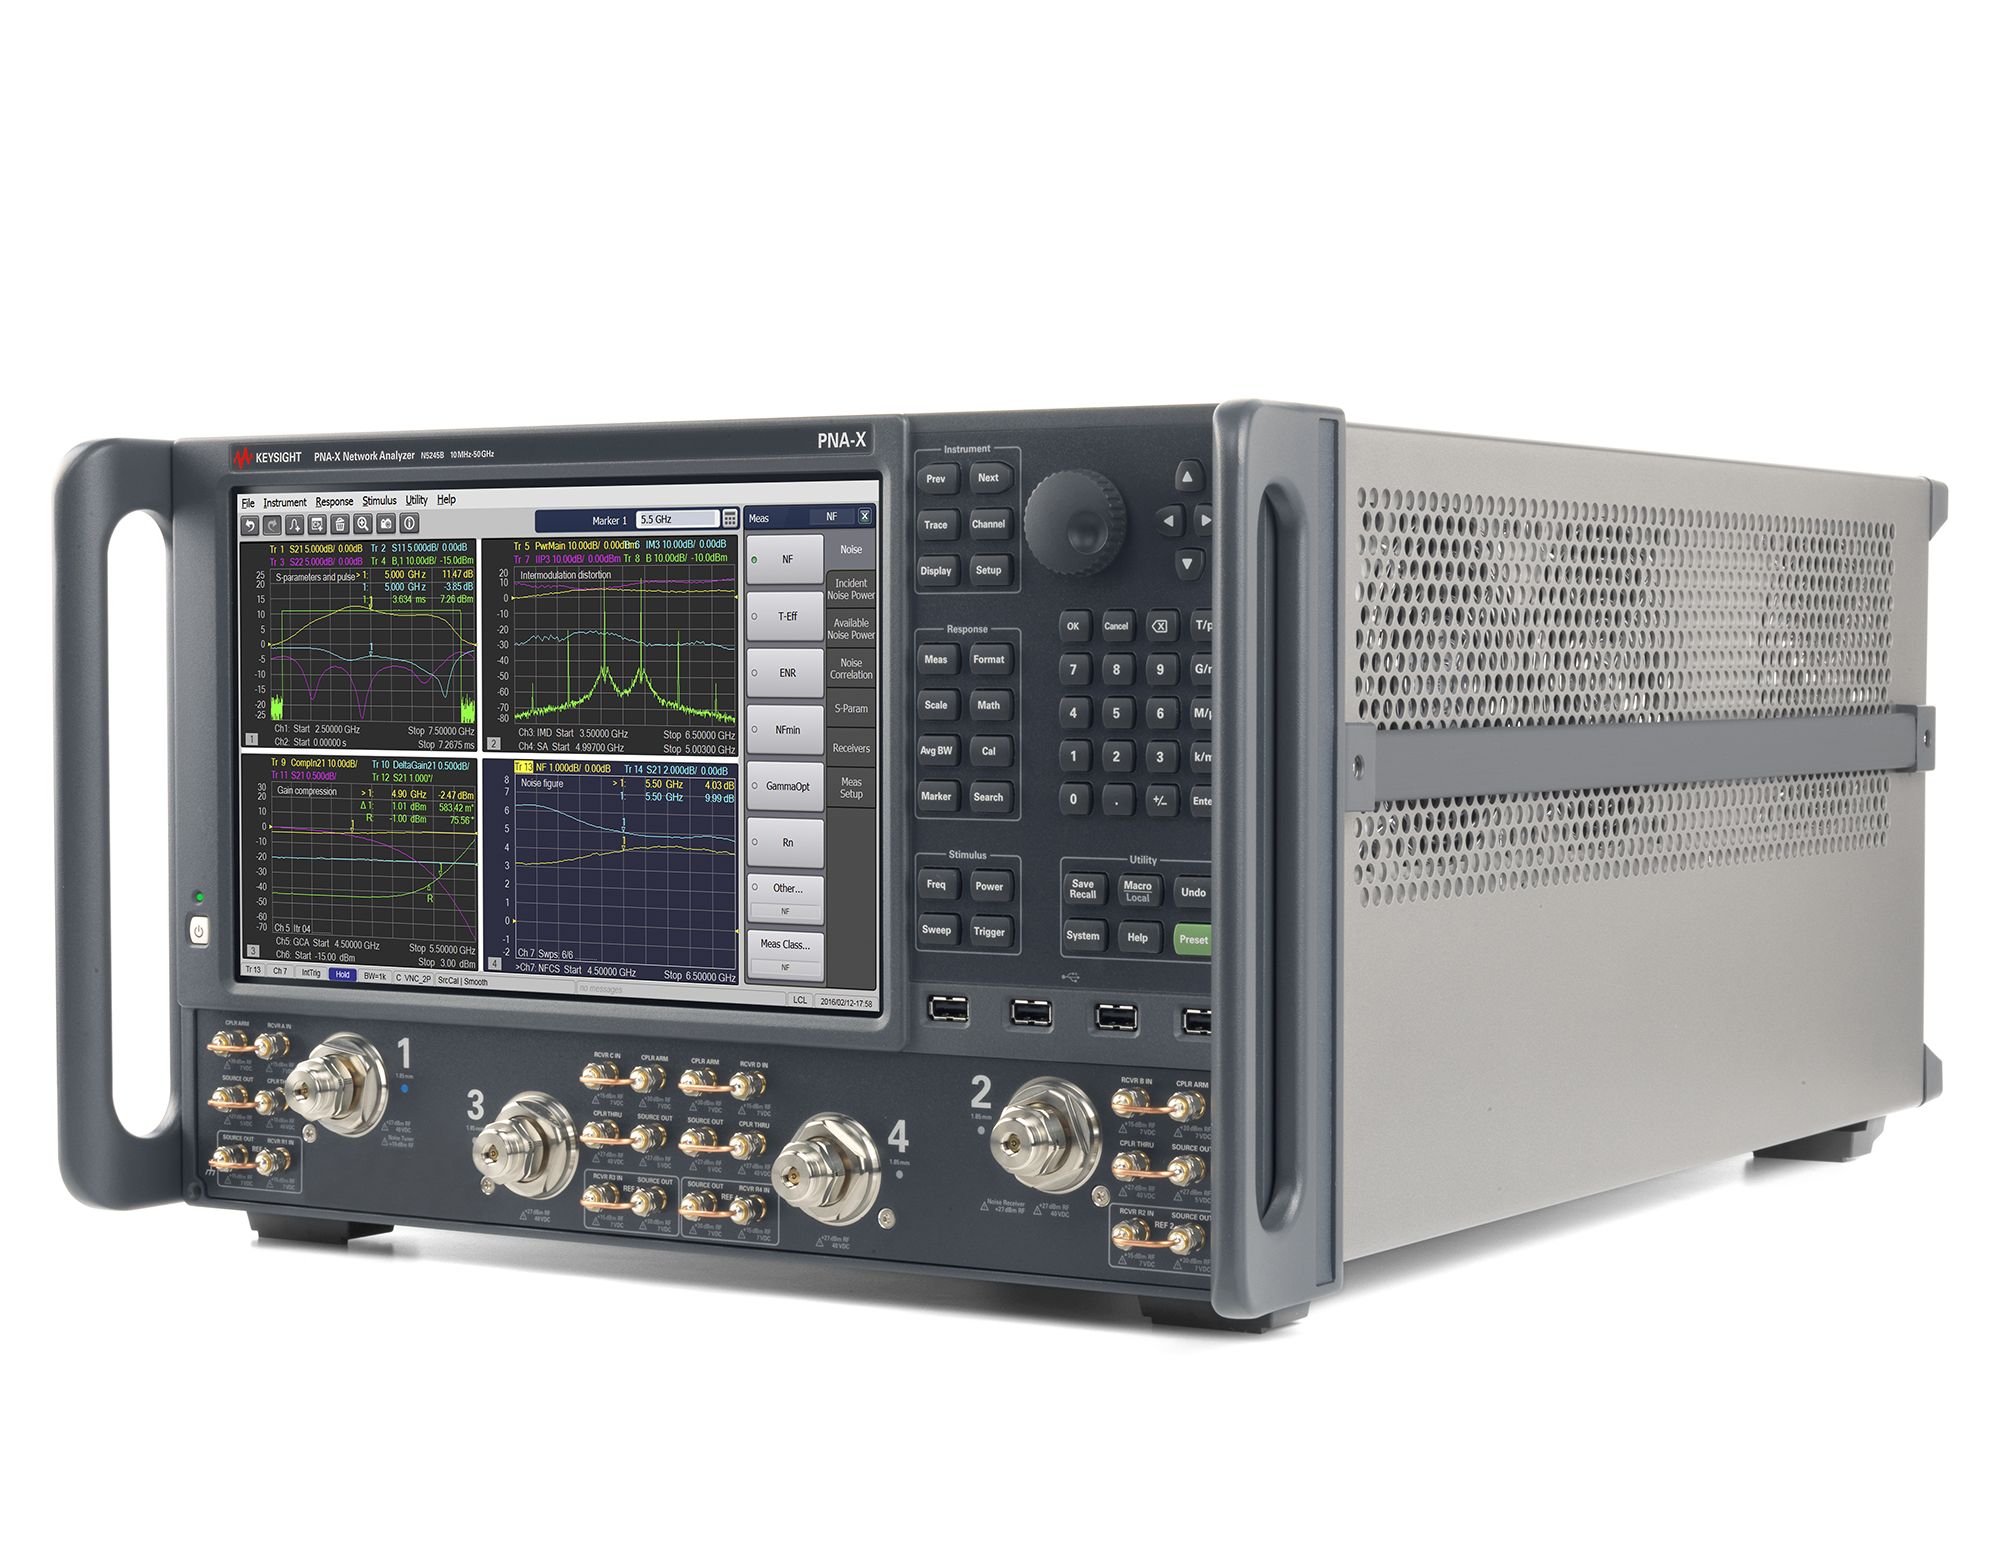 Keysight N5245B-425 900 Hz to 26.5 GHz/ 4-port/ Config. Test Set/ Source & Receiver Att./ Second Source/ Bias Tees/ Combiner/ Mech. Switches